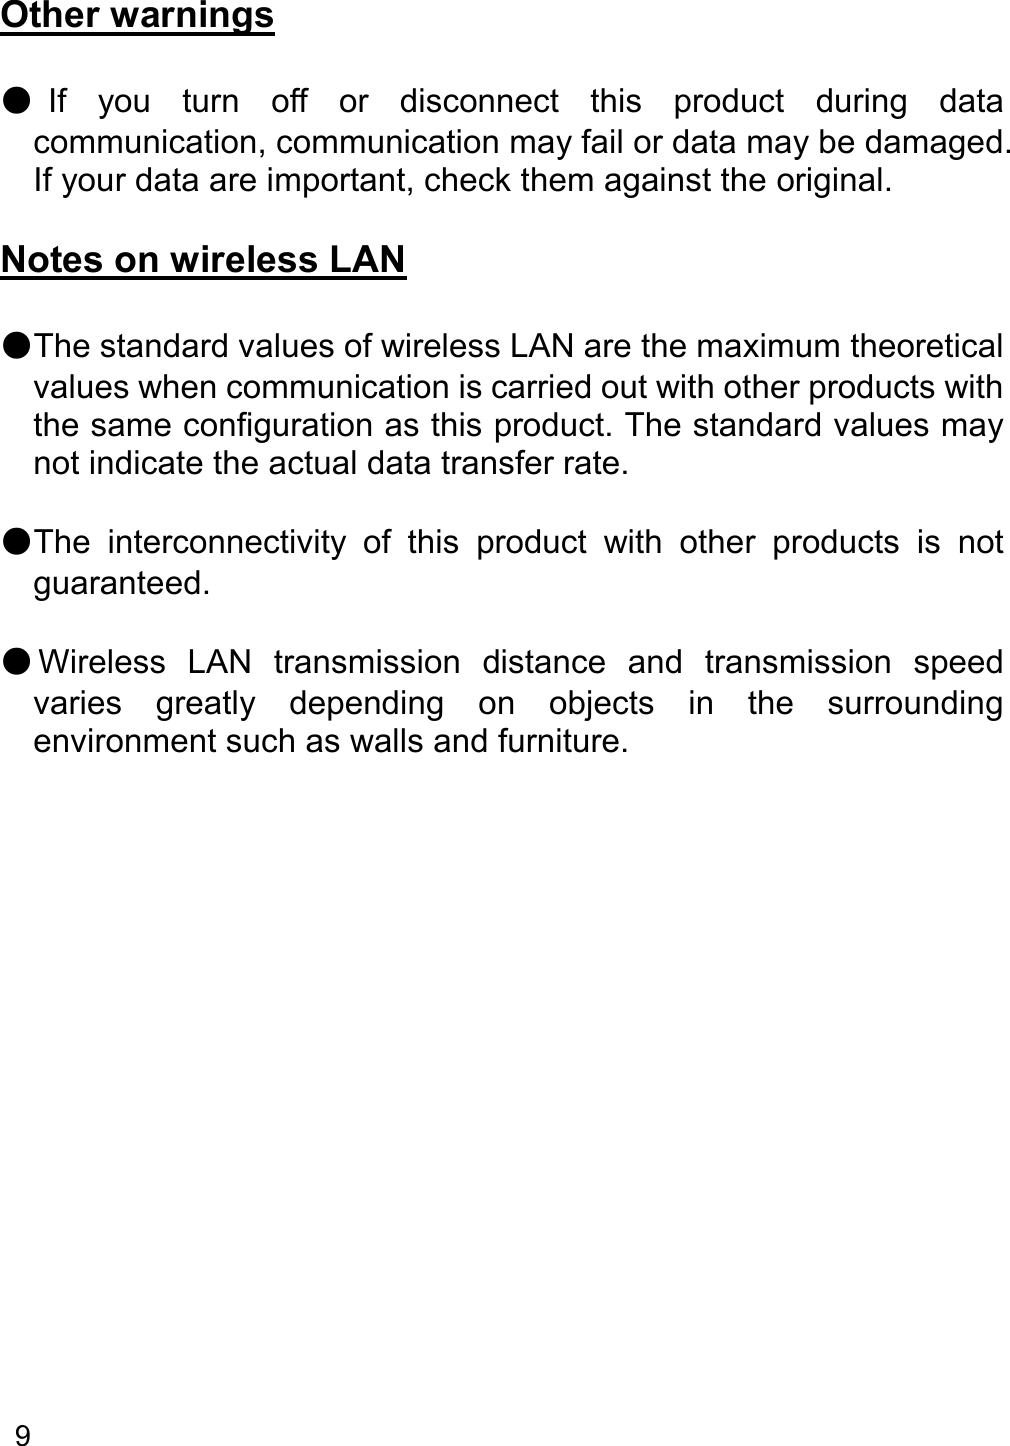   9    Other warnings  ●If  you  turn  off  or  disconnect  this  product  during  data communication, communication may fail or data may be damaged. If your data are important, check them against the original.  Notes on wireless LAN  ●The standard values of wireless LAN are the maximum theoretical values when communication is carried out with other products with the same configuration as this product. The standard values may not indicate the actual data transfer rate.  ●The  interconnectivity  of  this  product  with  other  products  is  not guaranteed.  ●Wireless  LAN  transmission  distance  and  transmission  speed varies  greatly  depending  on  objects  in  the  surrounding environment such as walls and furniture.     